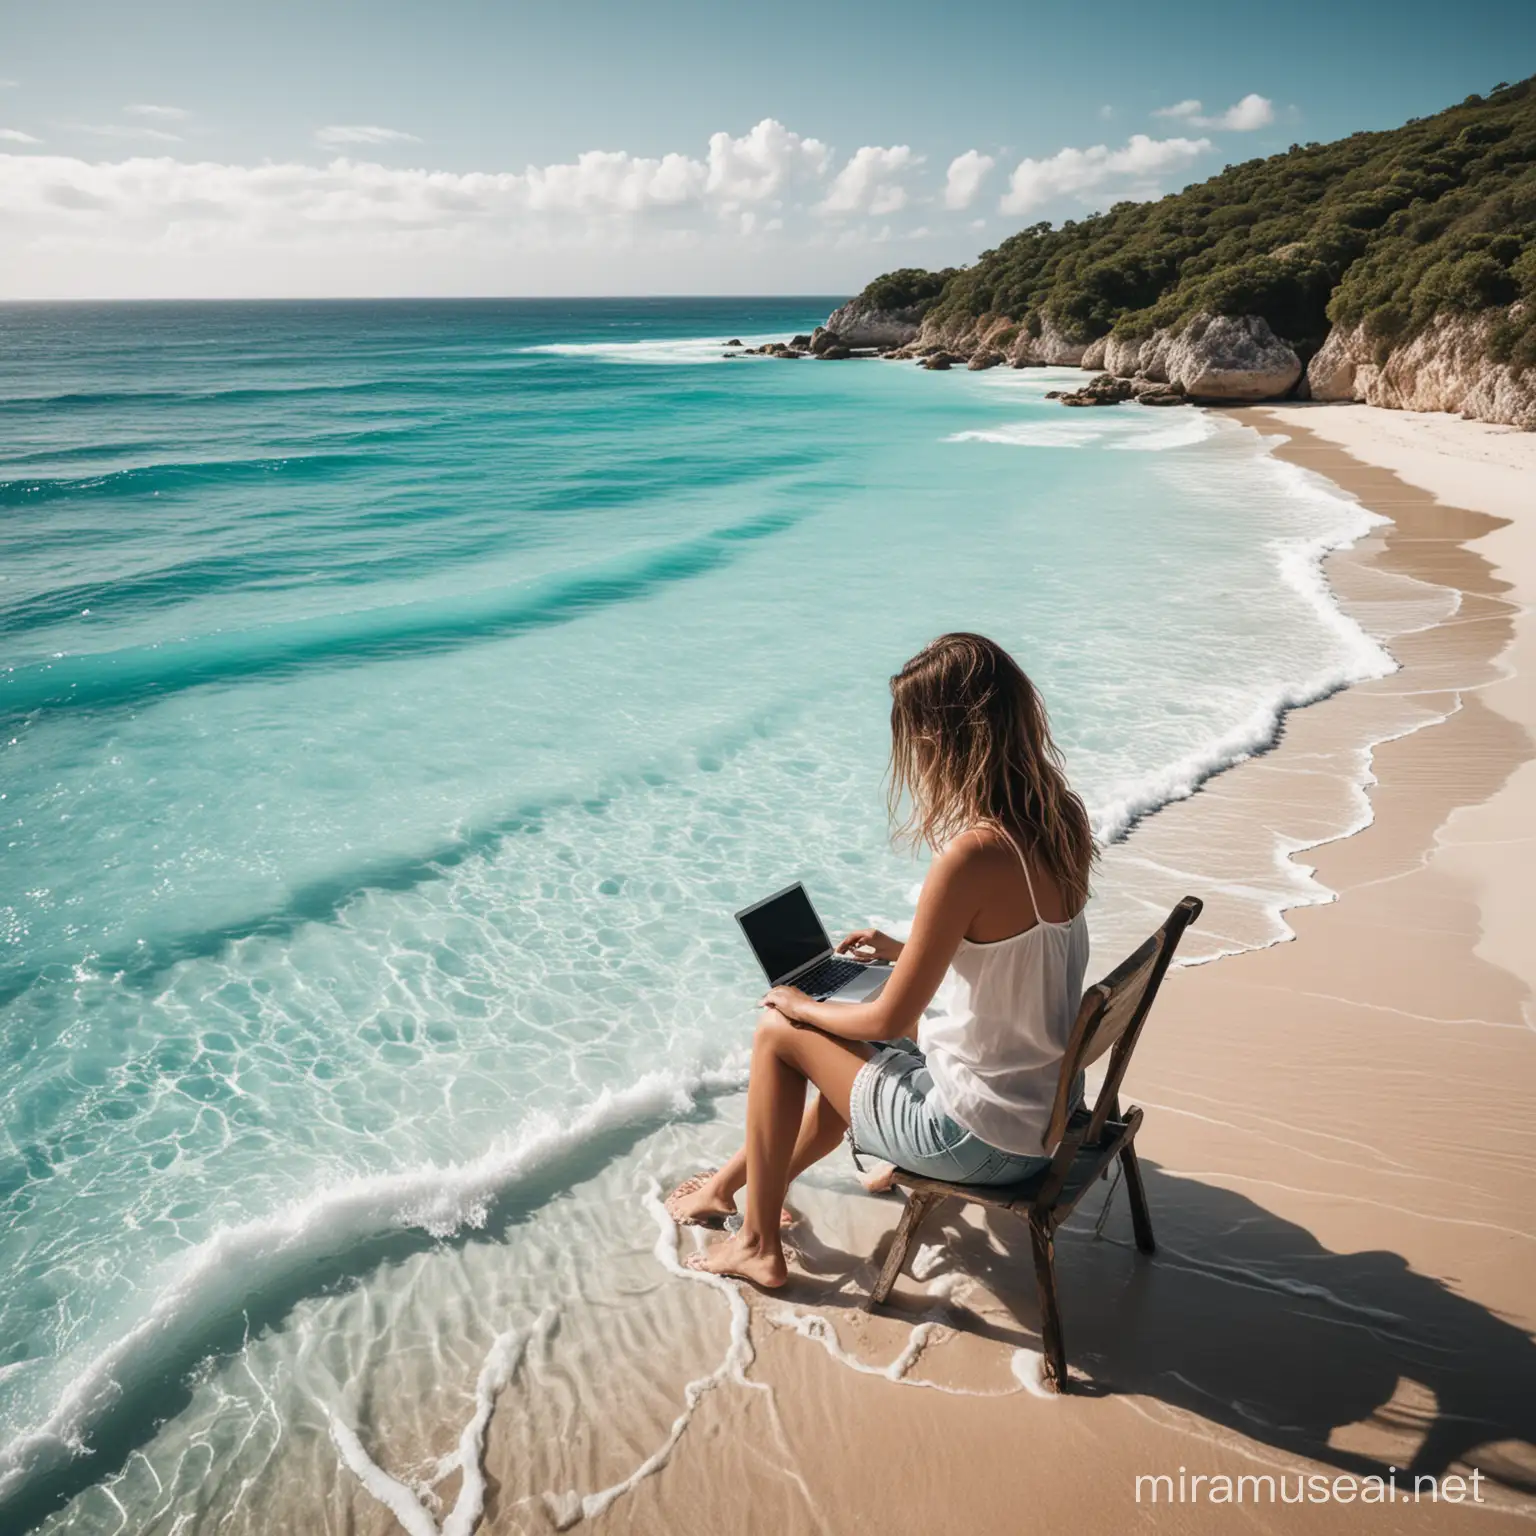 Woman Working on Laptop by Turquoise Ocean Shore